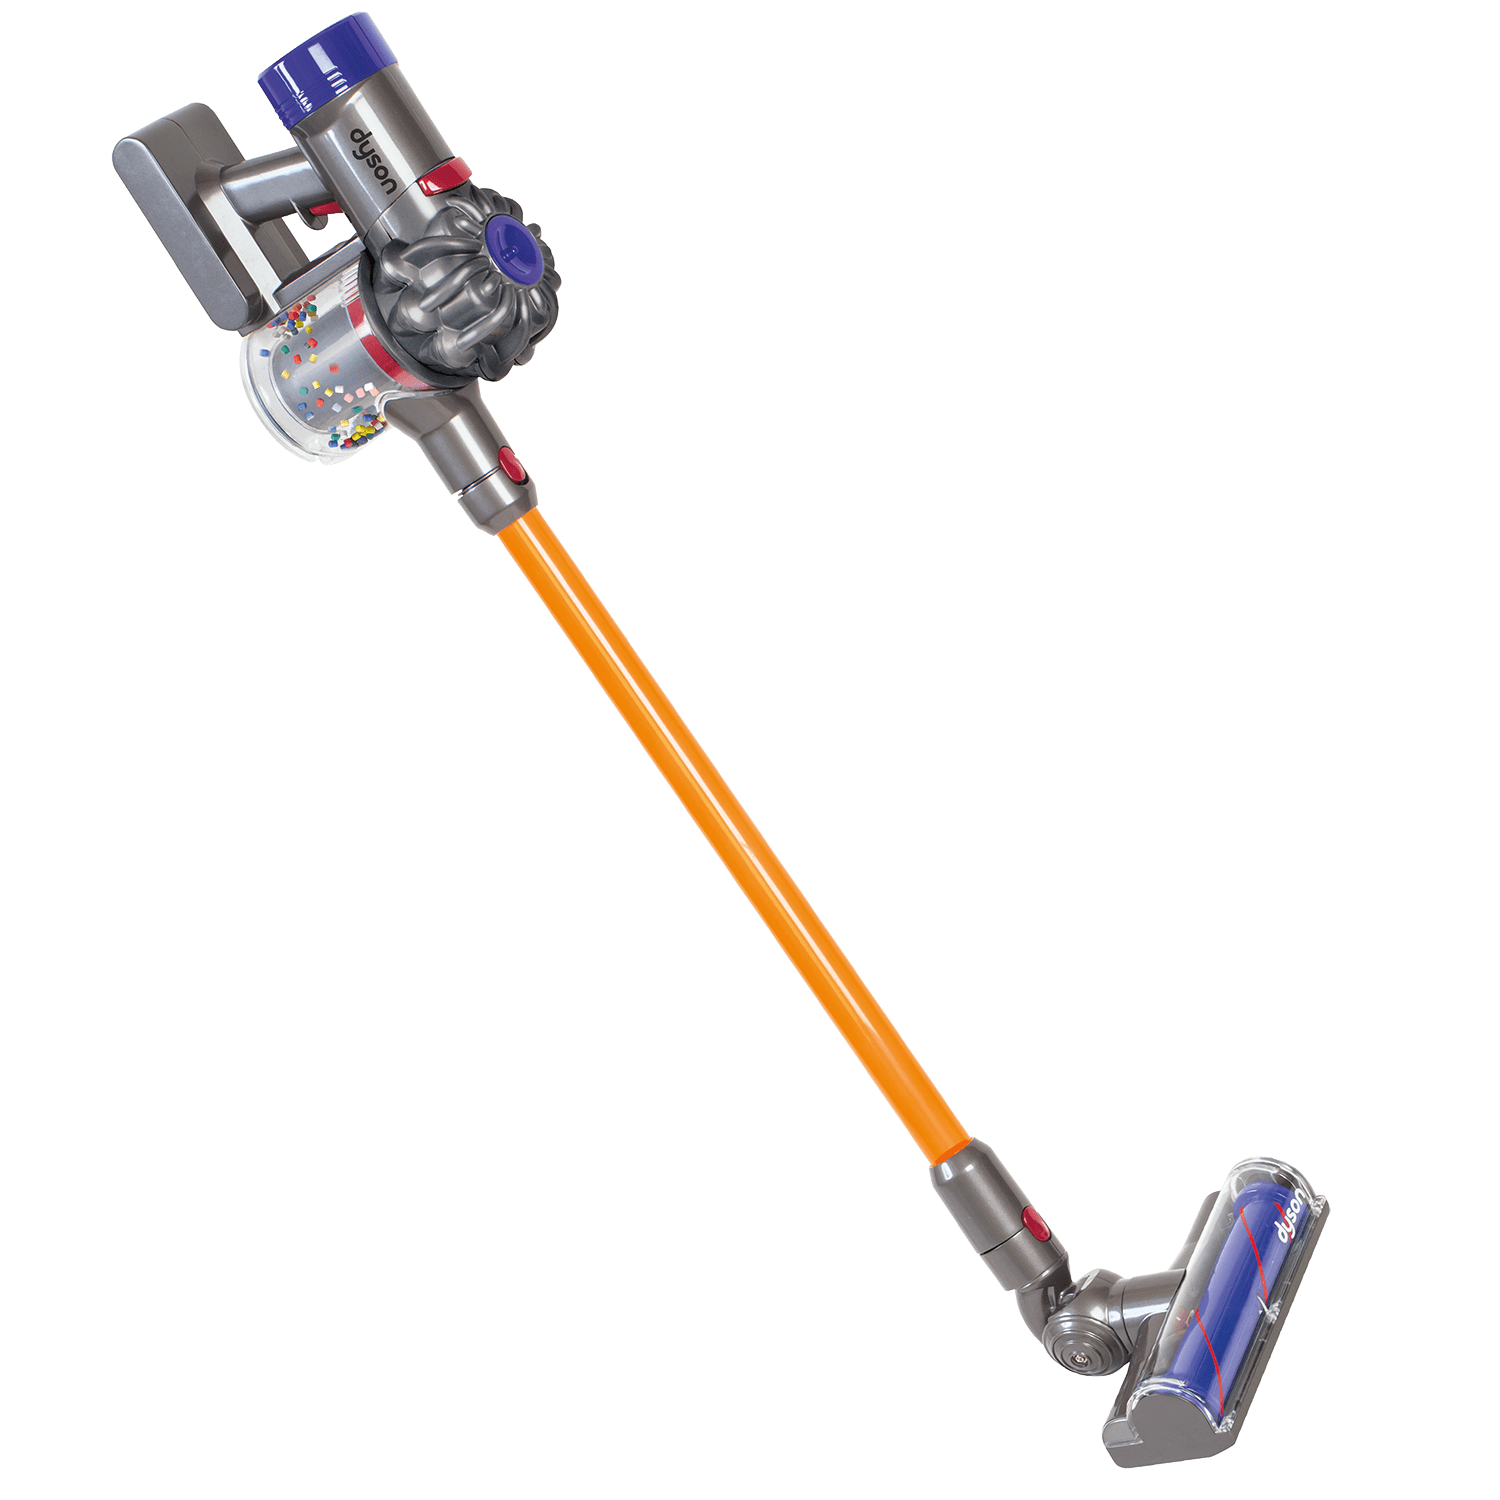 Dyson V8 Absolute cord-free vacuum cleaner